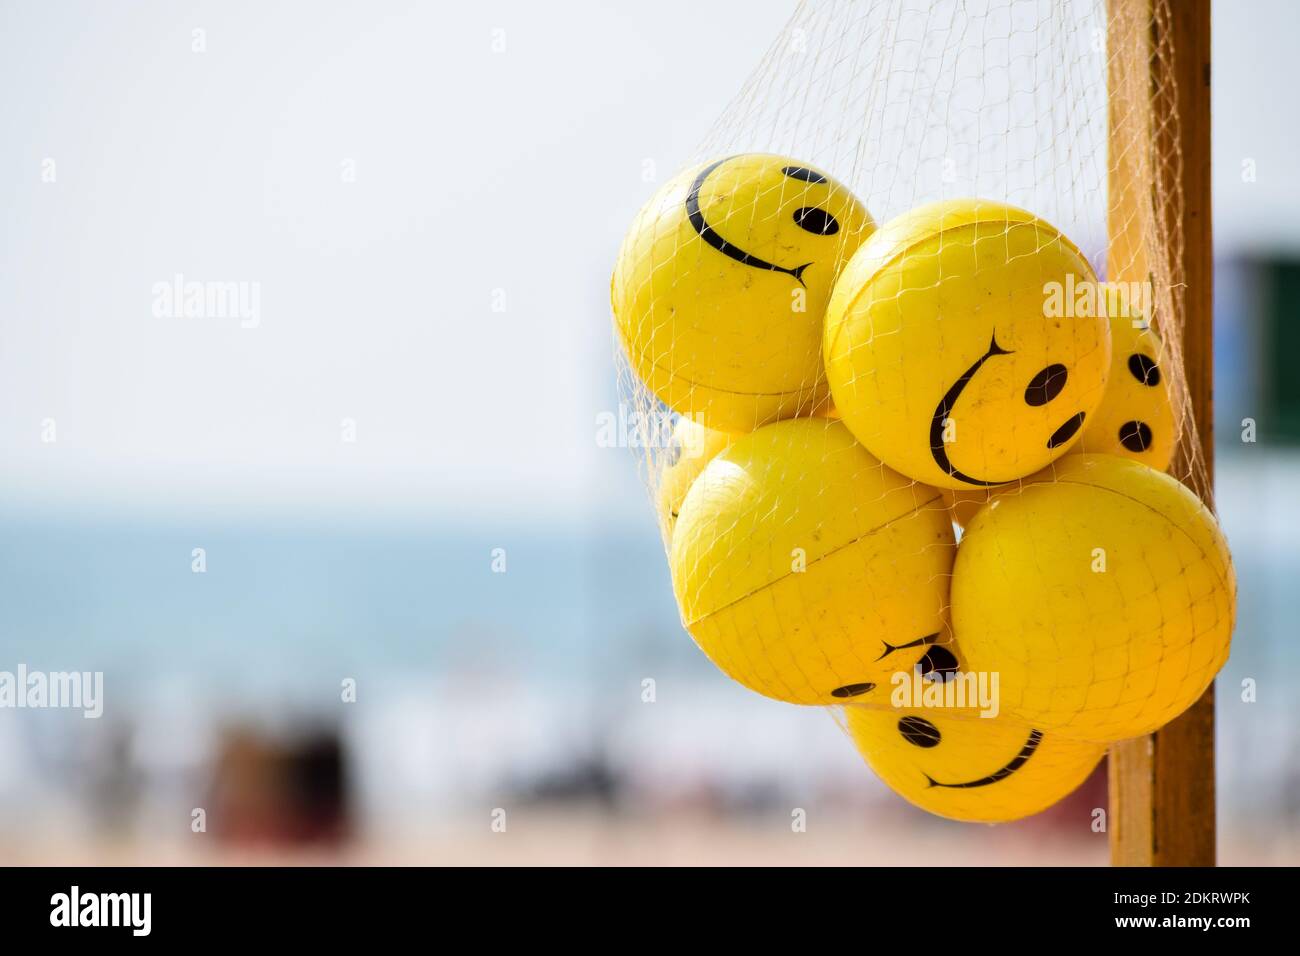 The bunch of Yellow-colored Stress reliever and hand exercise smiley balls on the beach hanging in the net bag. Stock Photo